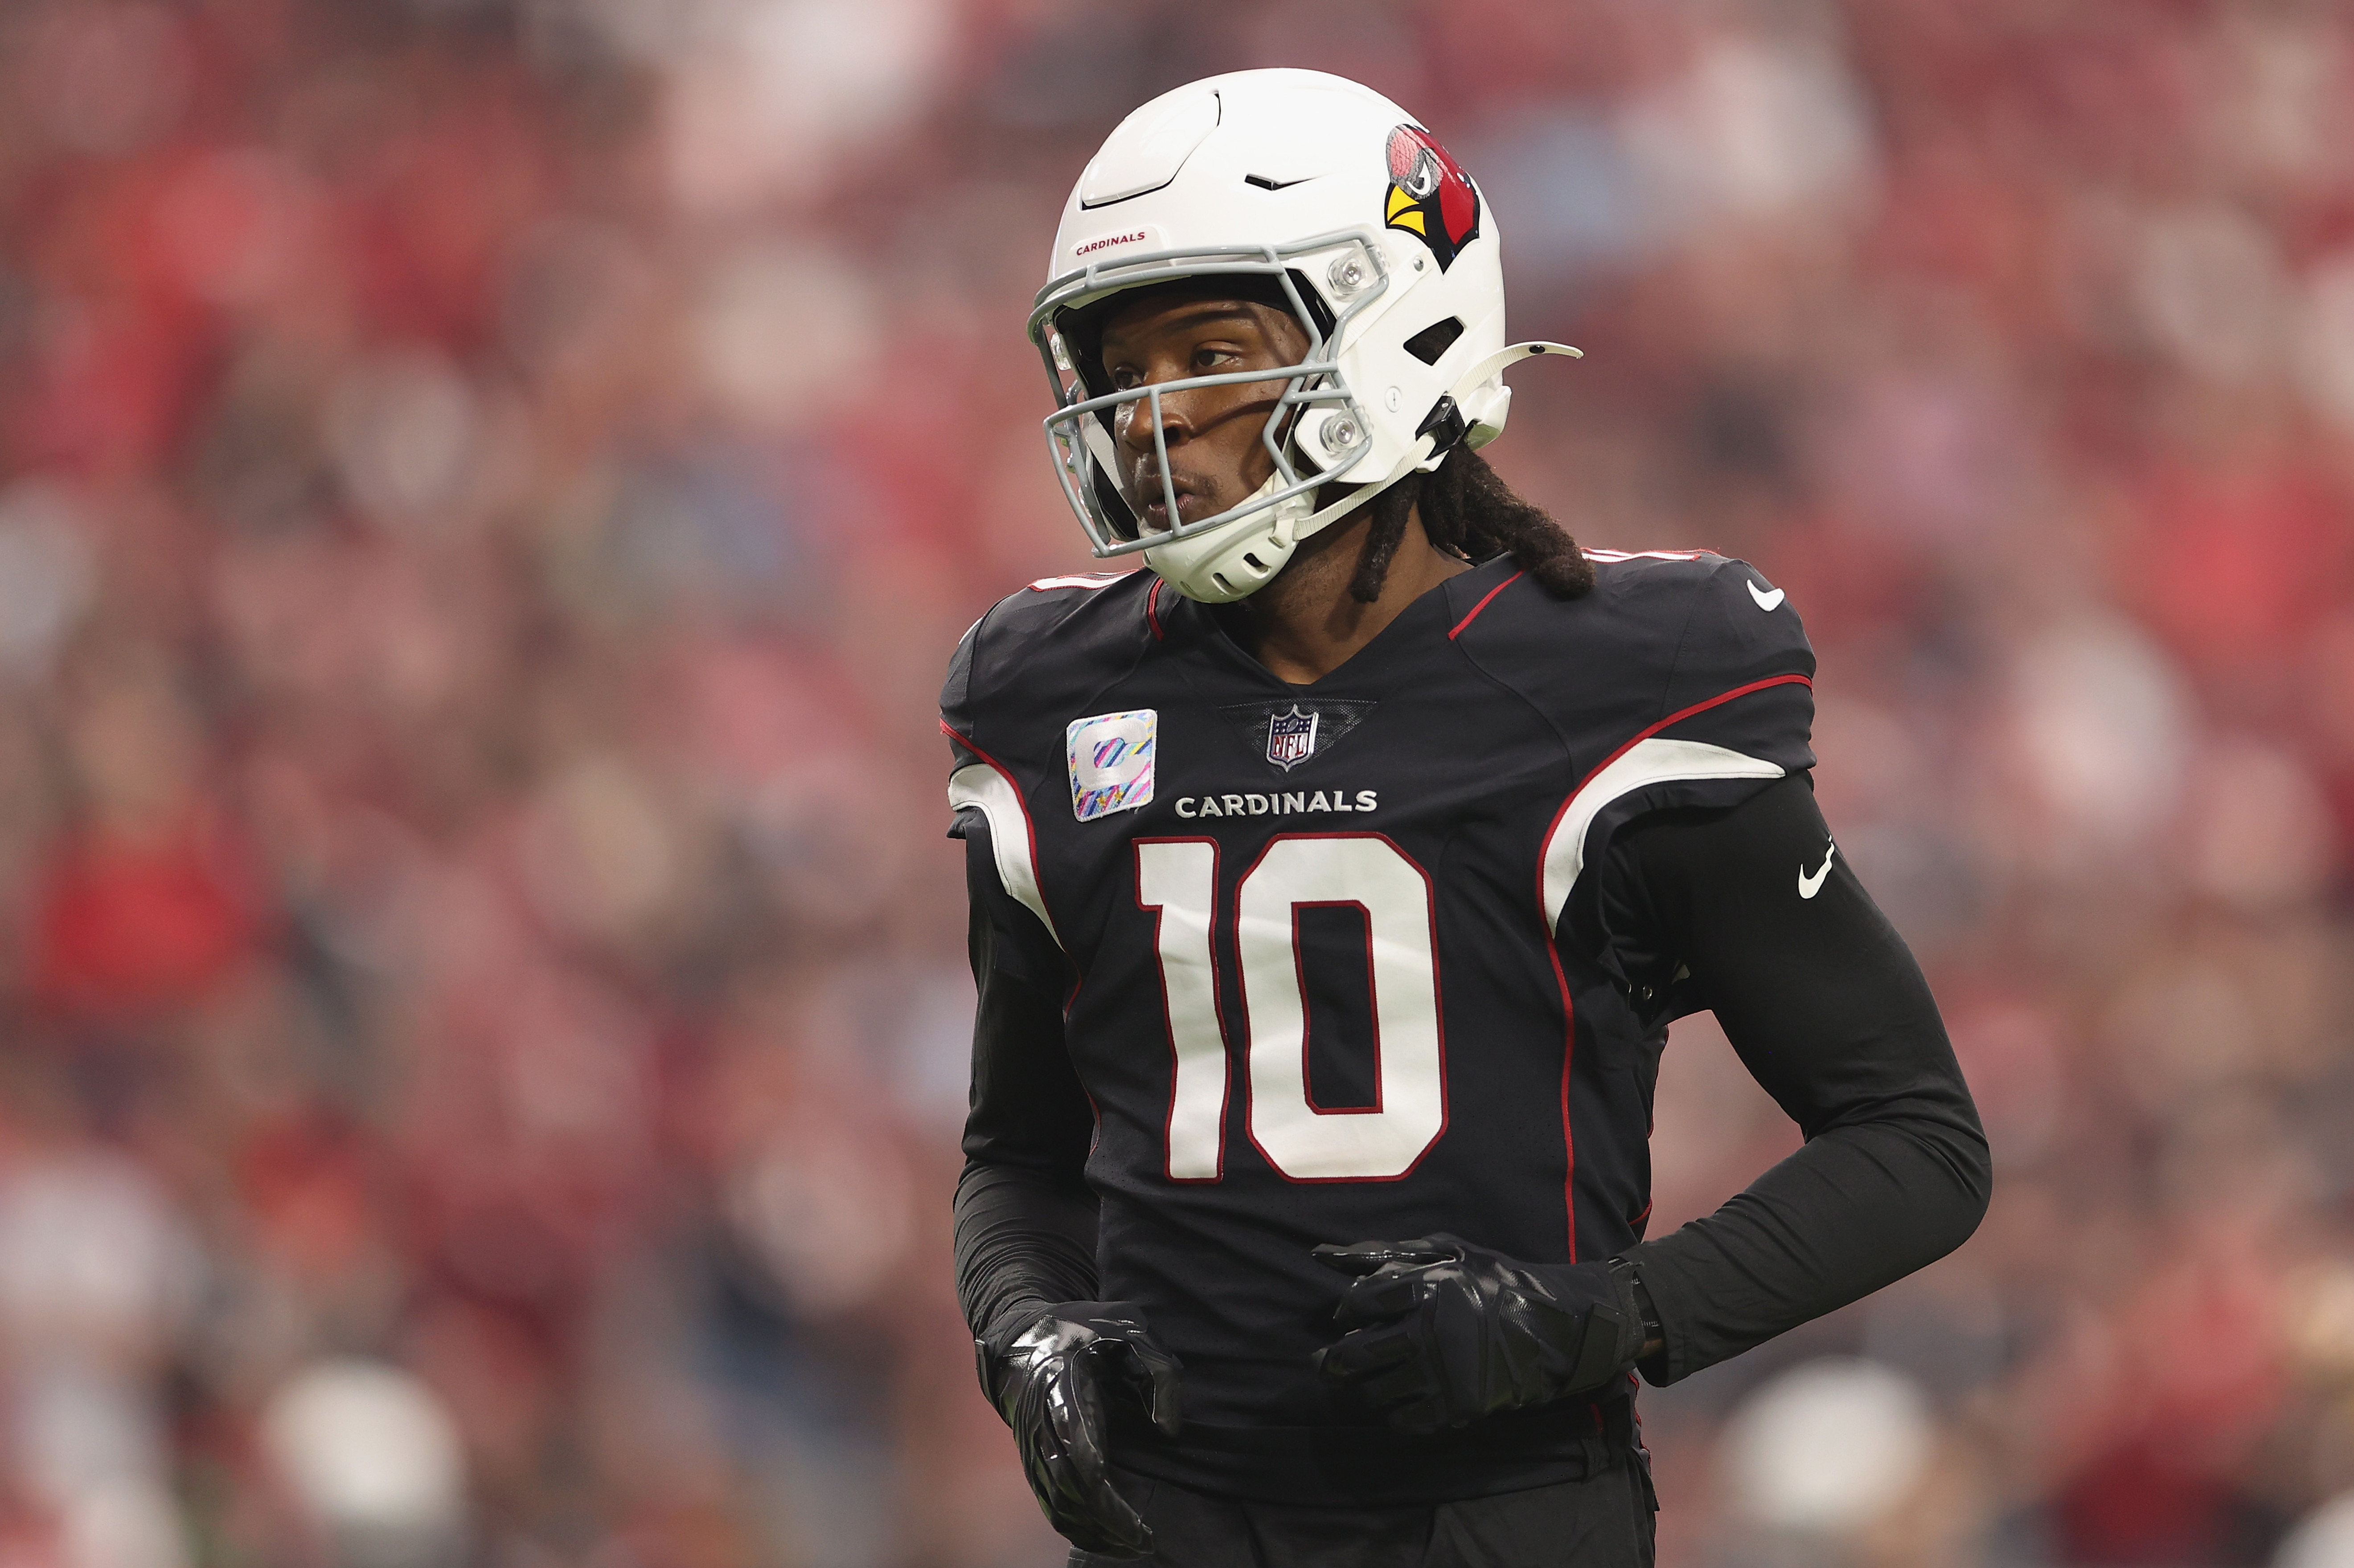 Cardinals' DeAndre Hopkins Suspended 6 Games for Violating NFL's PED Policy